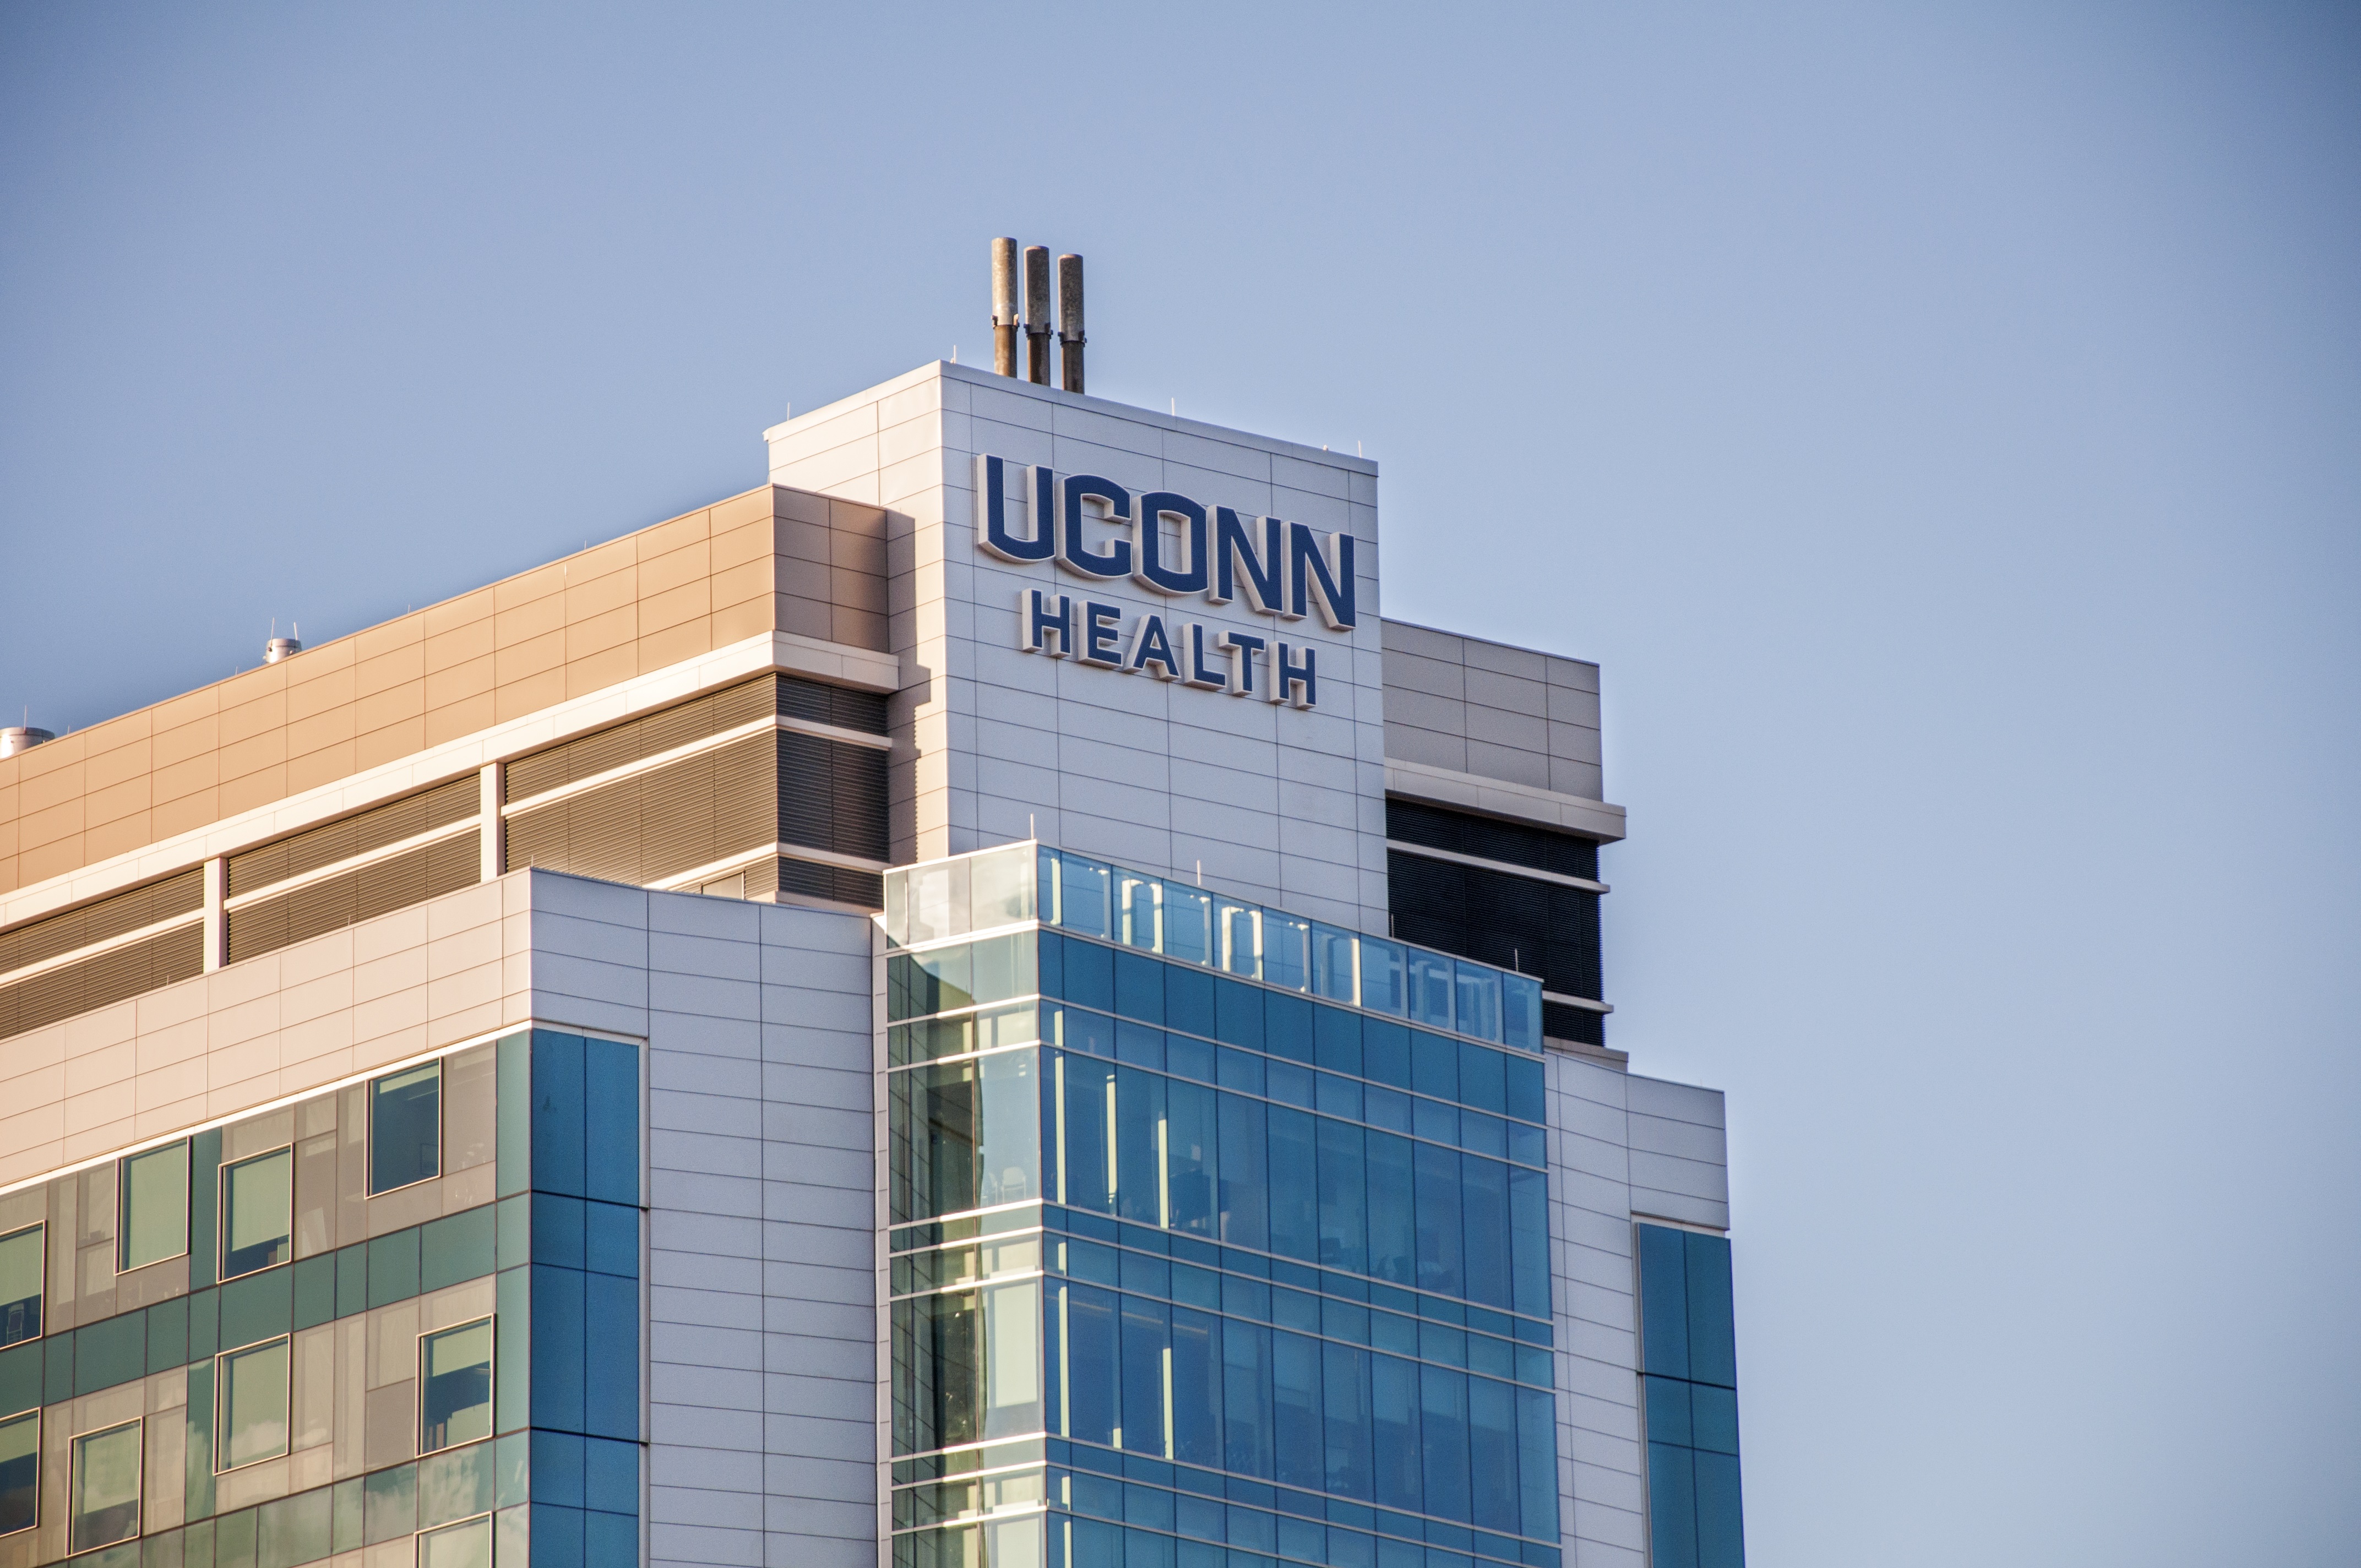 For three years running, UConn John Dempsey Hospital has received the highest "A" patient safety rating available from The Leapfrog Group (UConn Health Photo/Janine Gelineau).